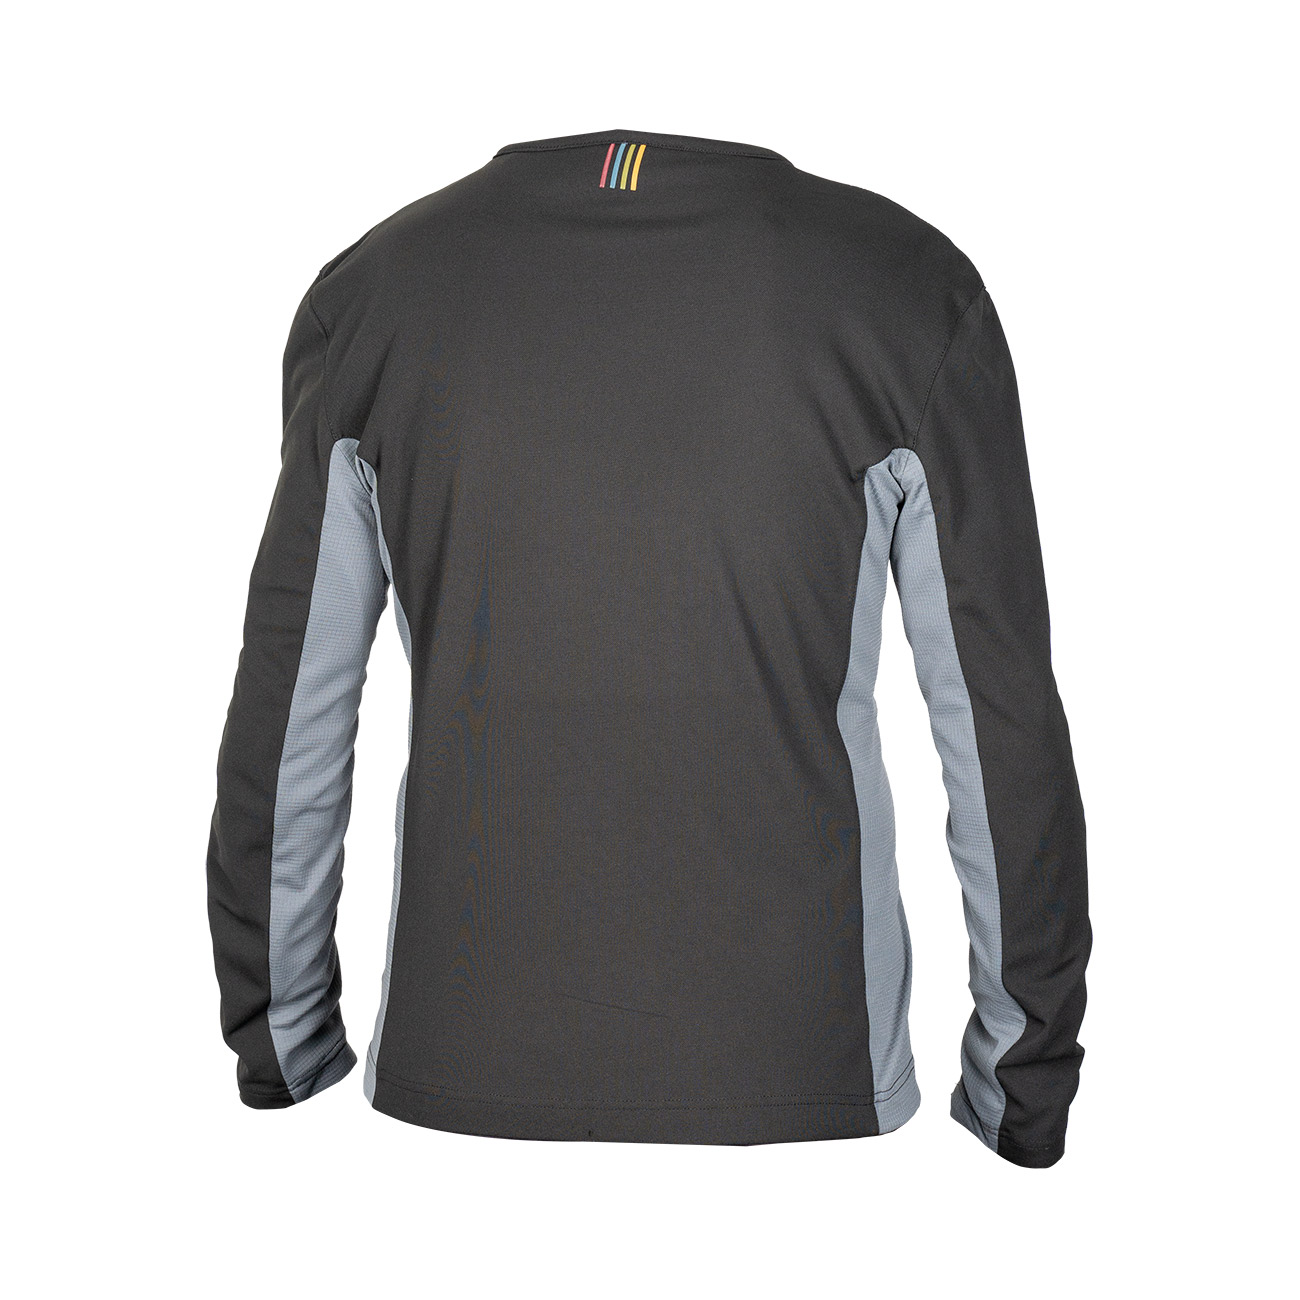 Cool layer functional long sleeve